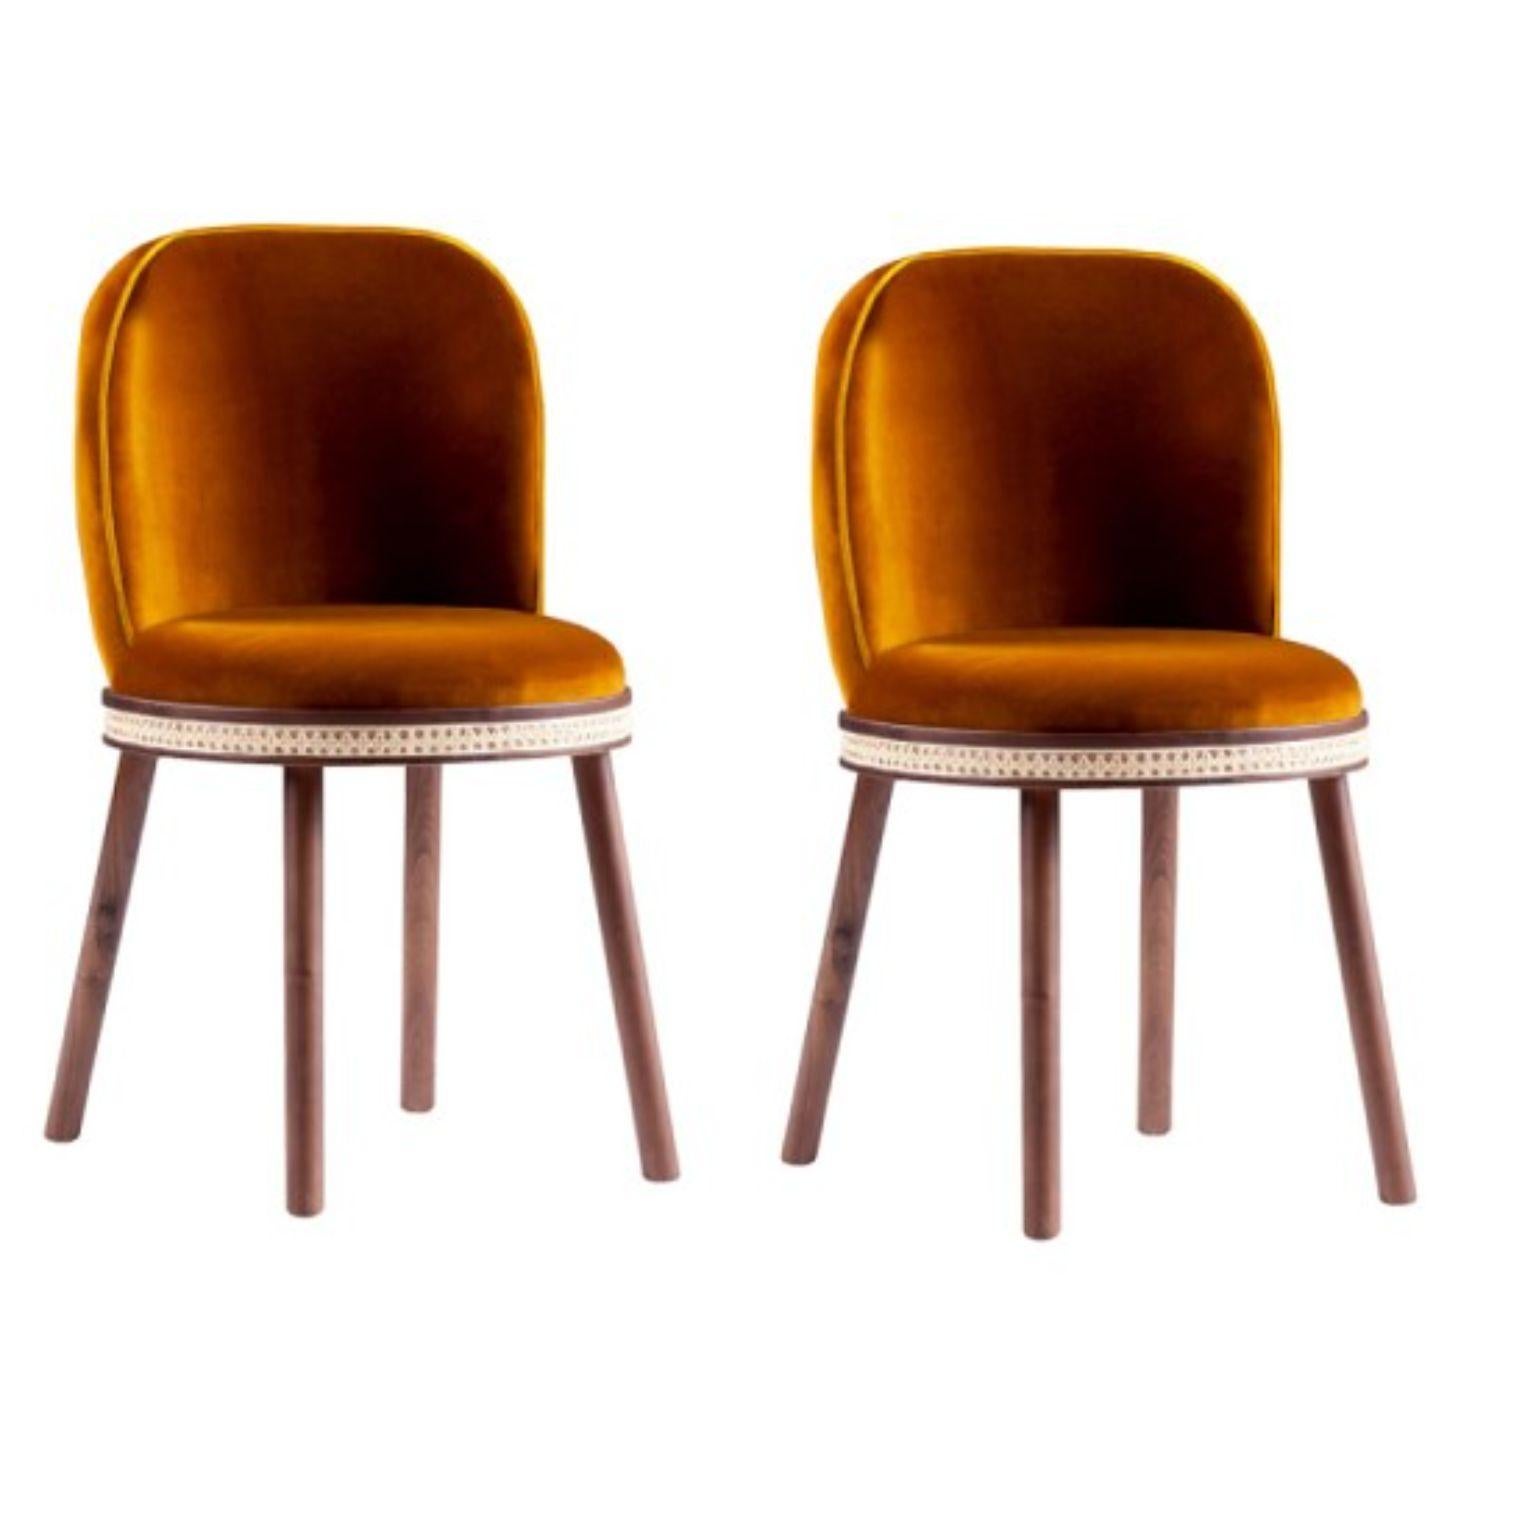 Set of 2 alma chairs by Dooq
Measures: W 51 cm 20”
D 53 cm 21”
H 86 cm 34”
seat height: 49 cm 19”

Materials: upholstery fabric or leather; structure solid wood feet lacquered MDF or solid wood rattan natural rattan. COM with natural walnut or